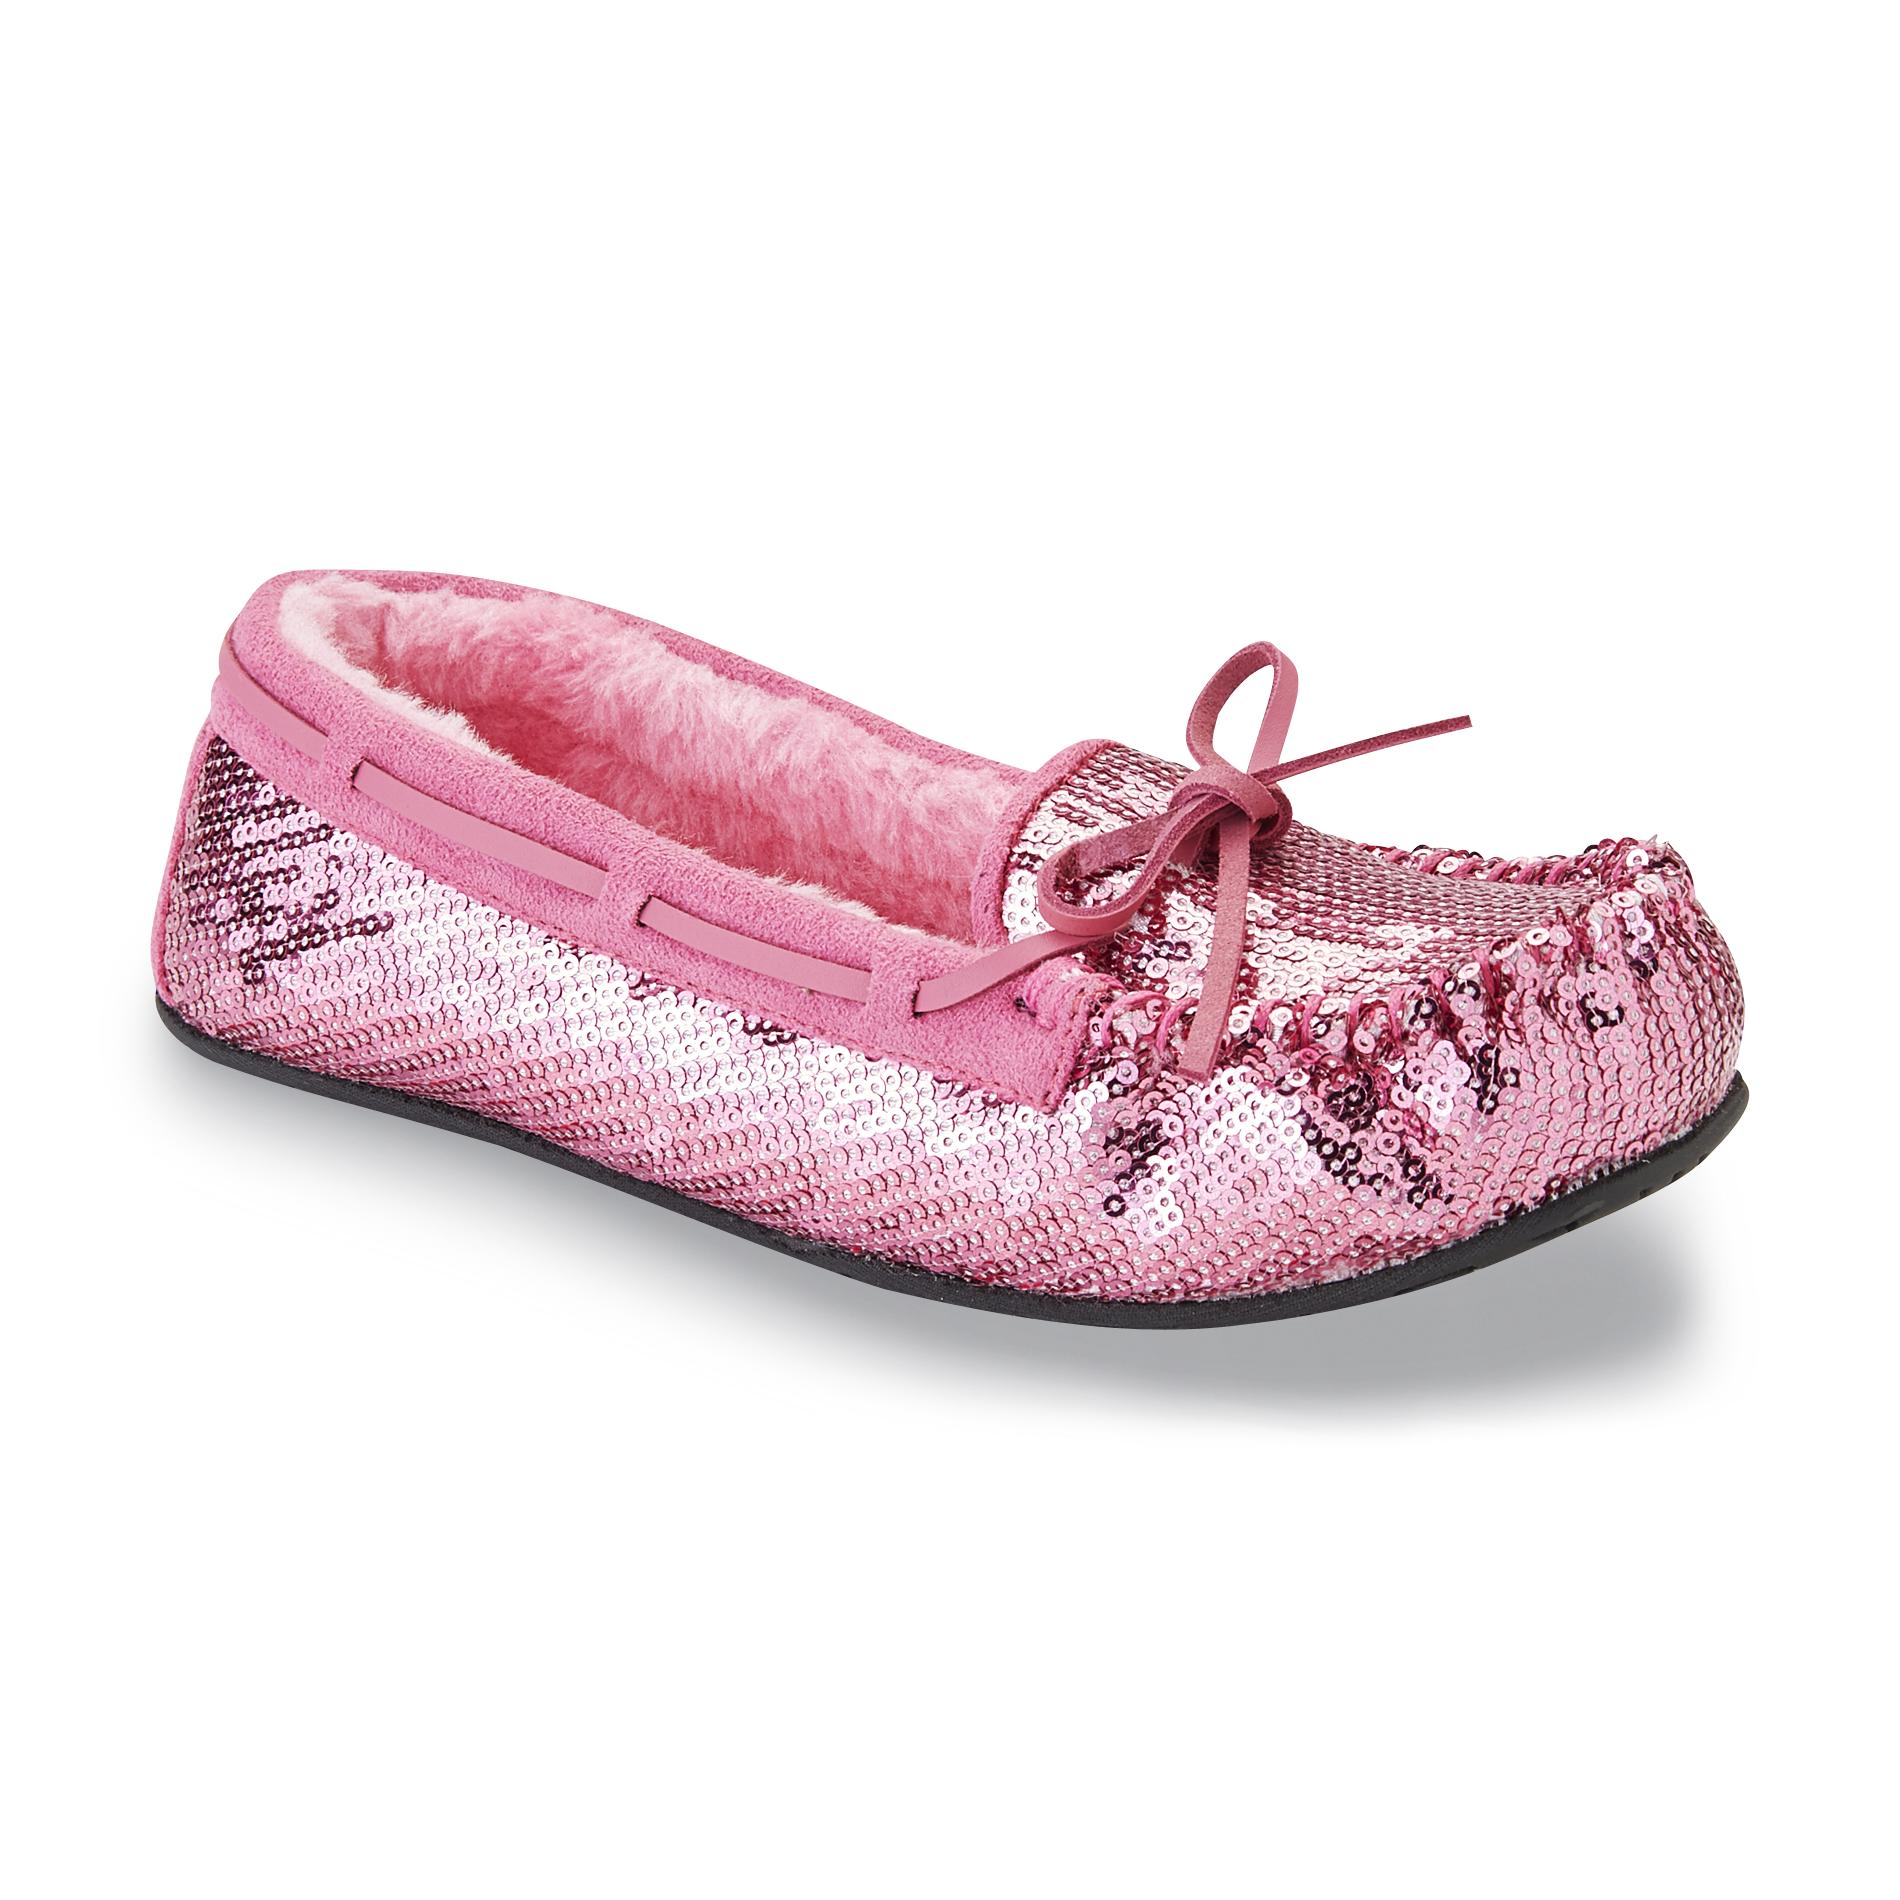 Route 66 Women's Milah Pink Sequined Moccasin Slipper